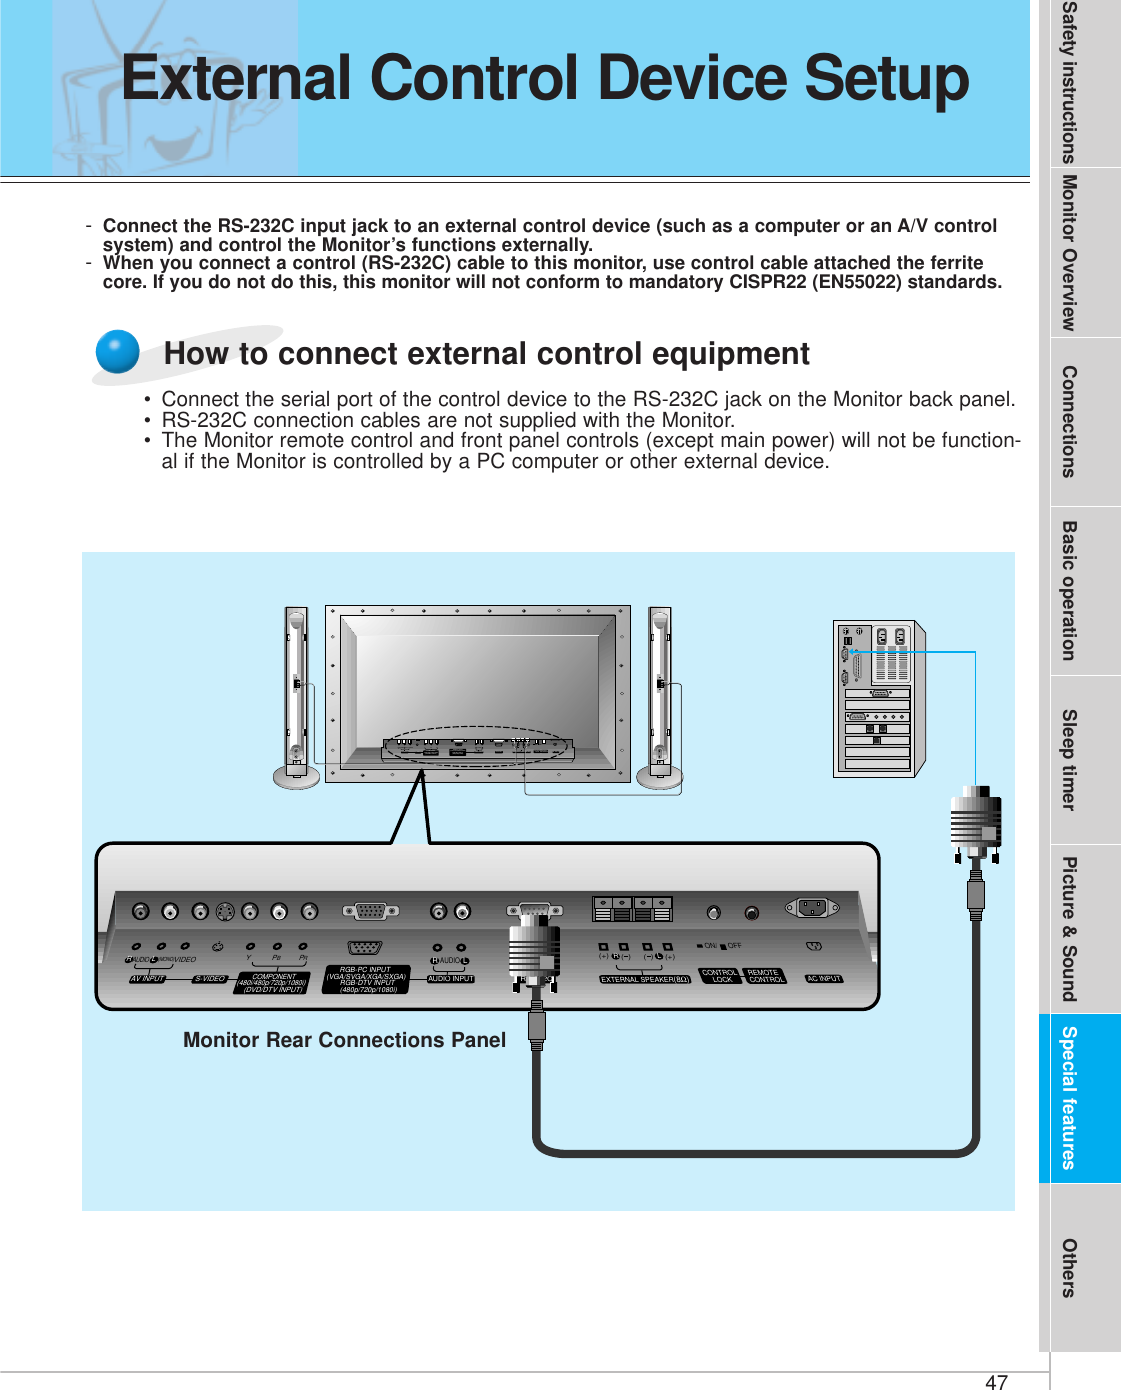 47Safety instructions Monitor Overview Connections Basic operation Sleep timer Picture &amp; Sound Special features Others-Connect the RS-232C input jack to an external control device (such as a computer or an A/V controlsystem) and control the Monitor’s functions externally.-When you connect a control (RS-232C) cable to this monitor, use control cable attached the ferritecore. If you do not do this, this monitor will not conform to mandatory CISPR22 (EN55022) standards.(+) (  ) (+)(  )AUDIO(MONO)RLVIDEO Y PBRPAV INPUTAUDIORL RLEXTERNAL SPEAKER (8Ω) AC INPUTCONTROLLOCK REMOTECONTROLAUDIO INPUTS-VIDEO COMPONENT(480i/480p/720p/1080i)RGB-PC INPUT(VGA/SVGA/XGA/SXGA)RGB-DTV INPUT(480p/720p/1080i)(DVD/DTV INPUT)(+) (  ) (+)(  )AUDIO(MONO)RLAV INPUT S-VIDEOCOMPONENT(480i/480p/720p/1080i)(DVD/DTV INPUT)RGB-PC INPUTAUDIO INPUTEXTERNAL SPEAKER(8Ω)RLAC INPUT(VGA/SVGA/XGA/SXGA)RGB-DTV INPUT(480p/720p/1080i)VIDEO YPBPRRS-232CRS-232CRLAUDIOREMOTECONTROLCONTROLLOCKON/ OFFON/ OFFMonitor Rear Connections Panel• Connect the serial port of the control device to the RS-232C jack on the Monitor back panel.• RS-232C connection cables are not supplied with the Monitor.• The Monitor remote control and front panel controls (except main power) will not be function-al if the Monitor is controlled by a PC computer or other external device.How to connect external control equipmentExternal Control Device Setup